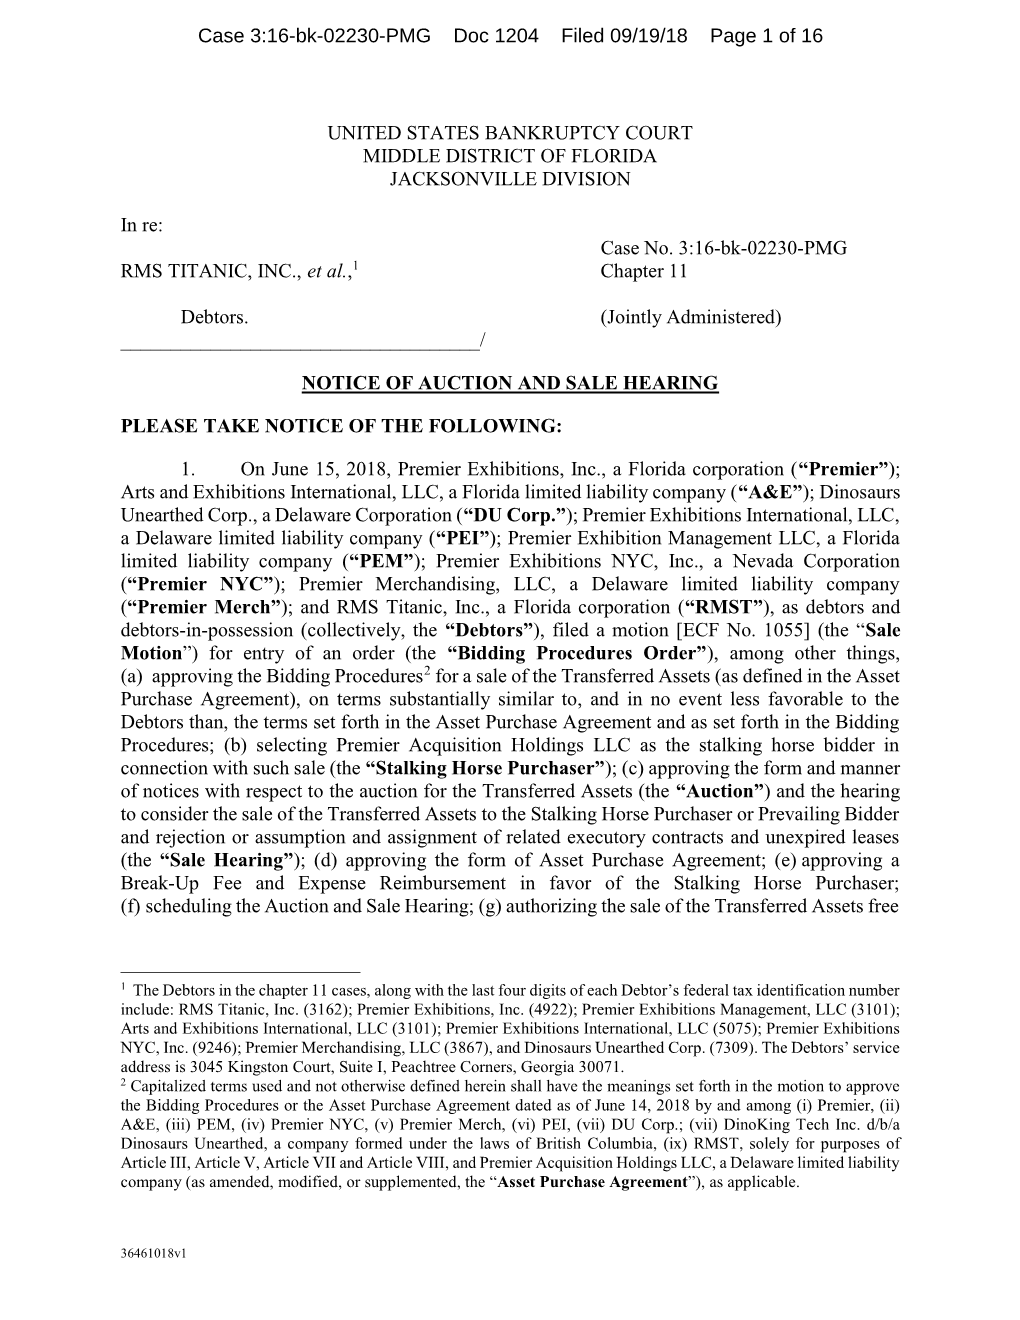 Case 3:16-Bk-02230-PMG Doc 1204 Filed 09/19/18 Page 1 of 16